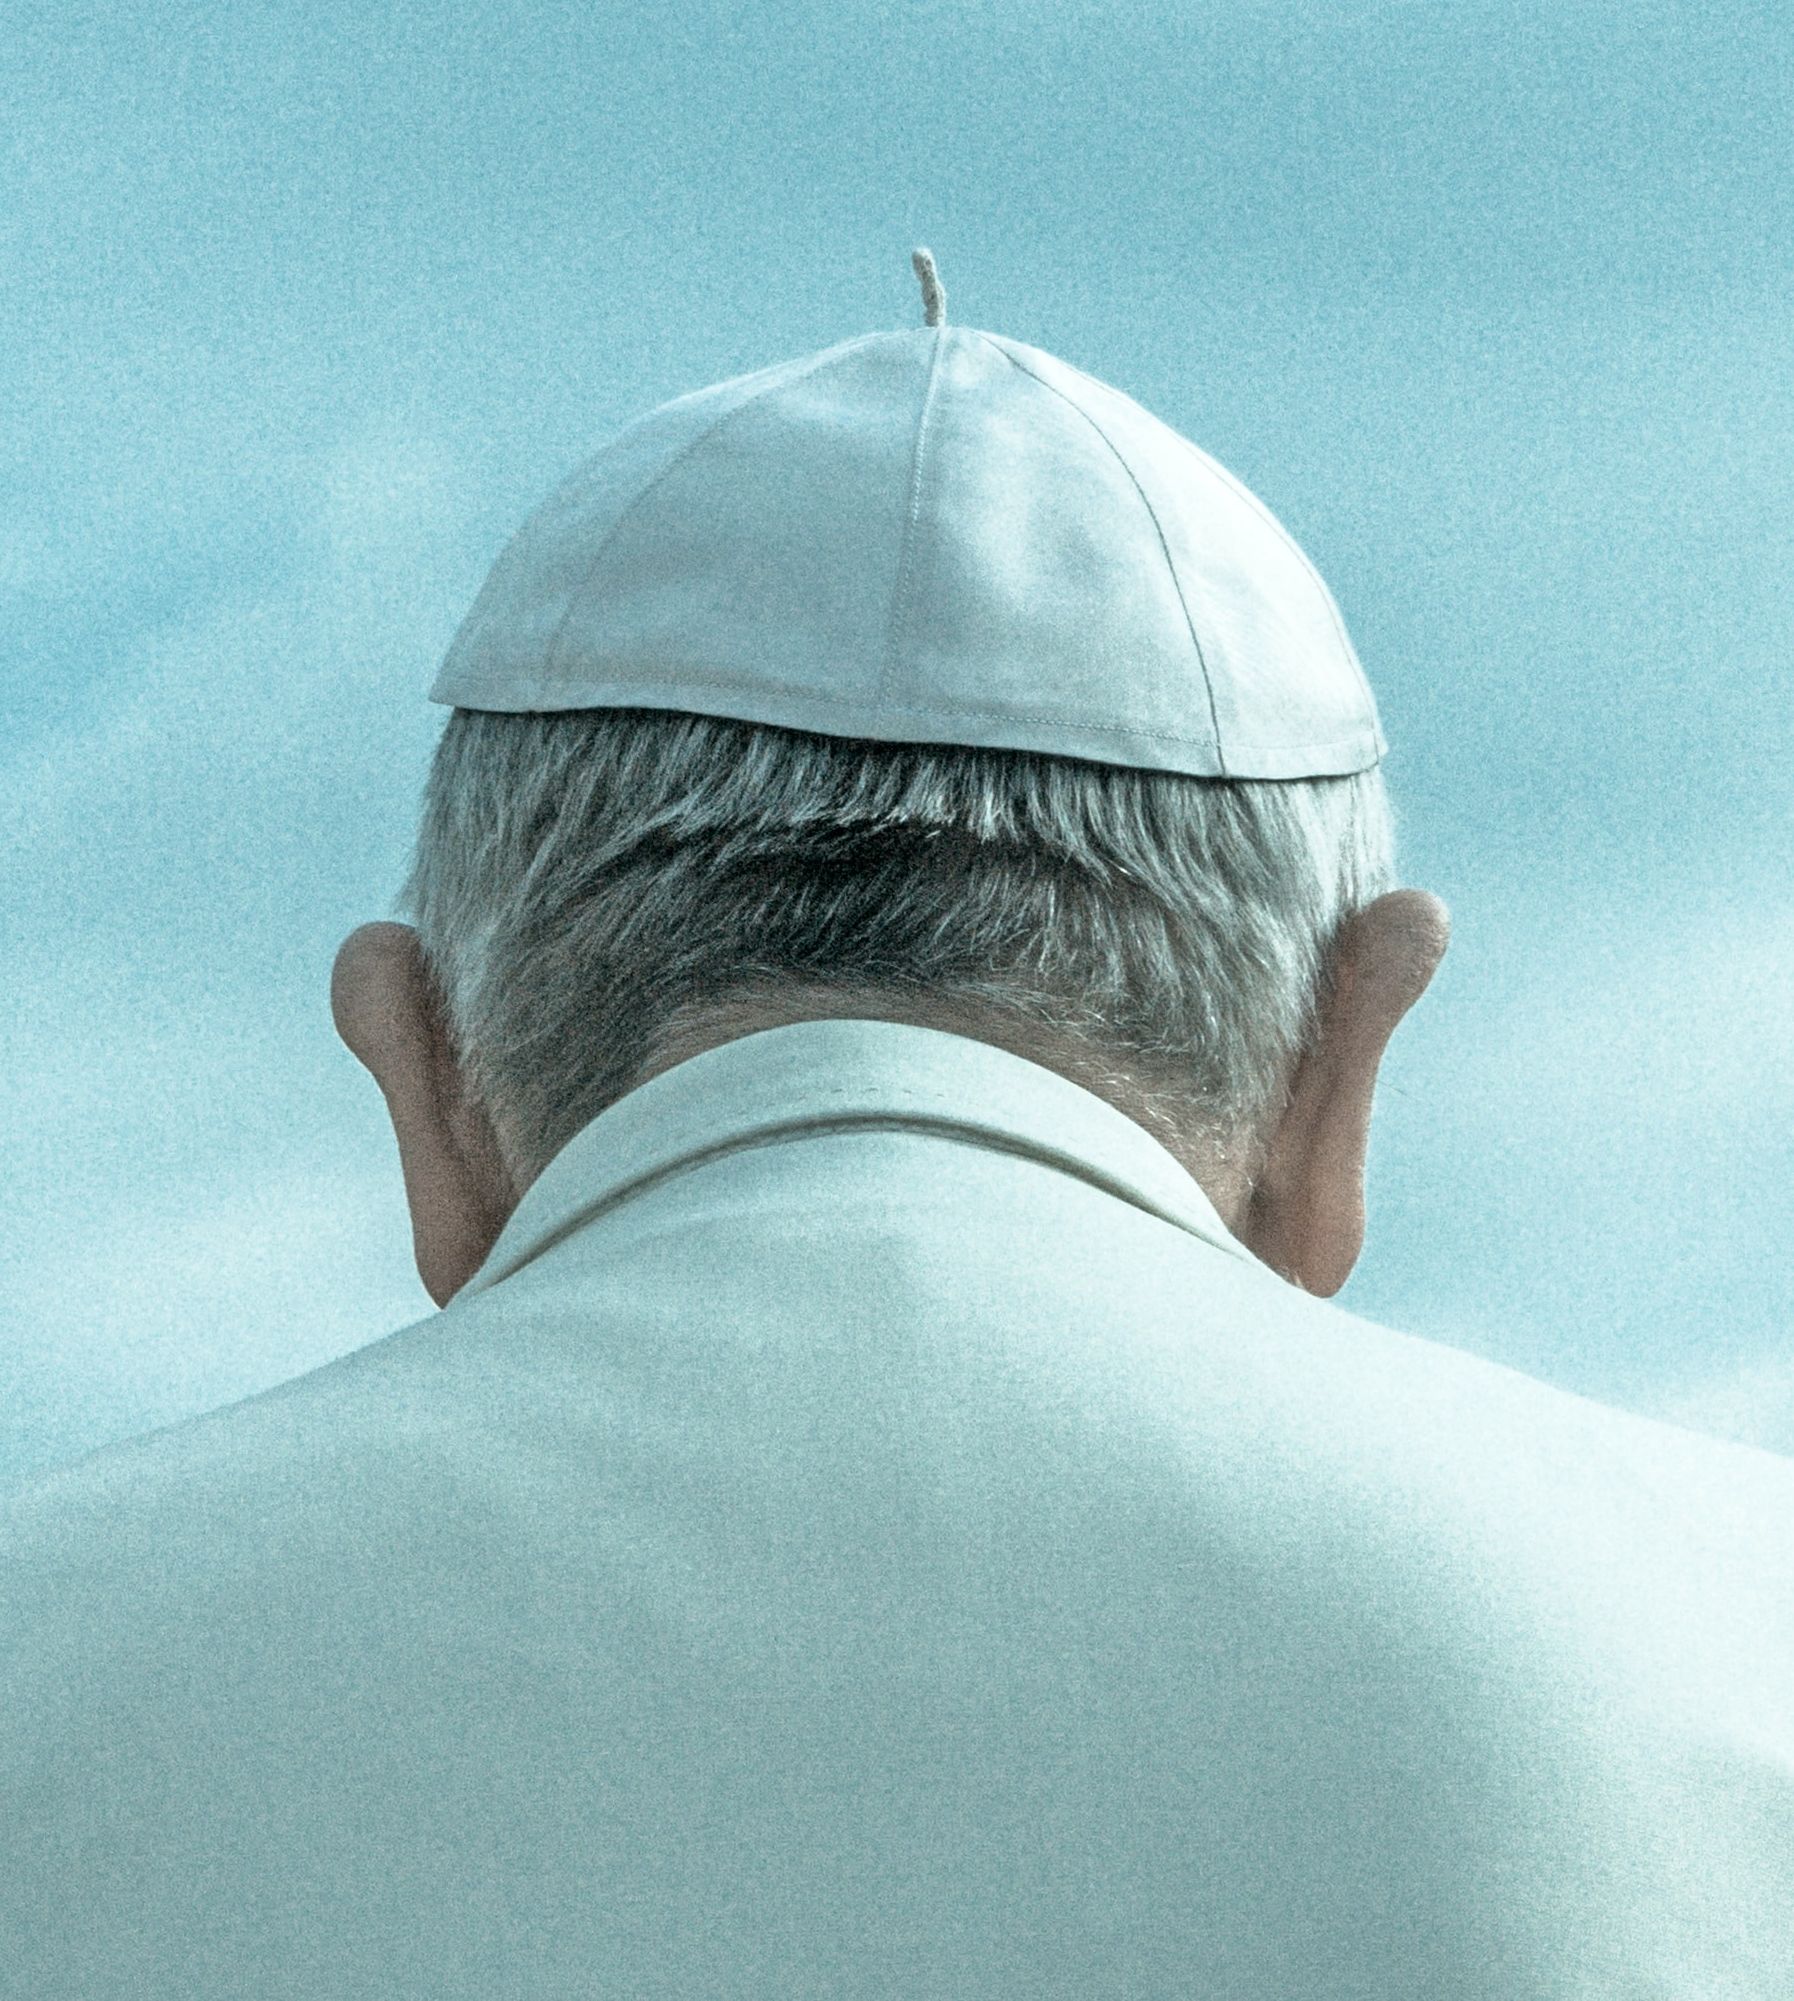 PAST EVENT: Webinar: Francis at 10: where is the Pope leading our Church?